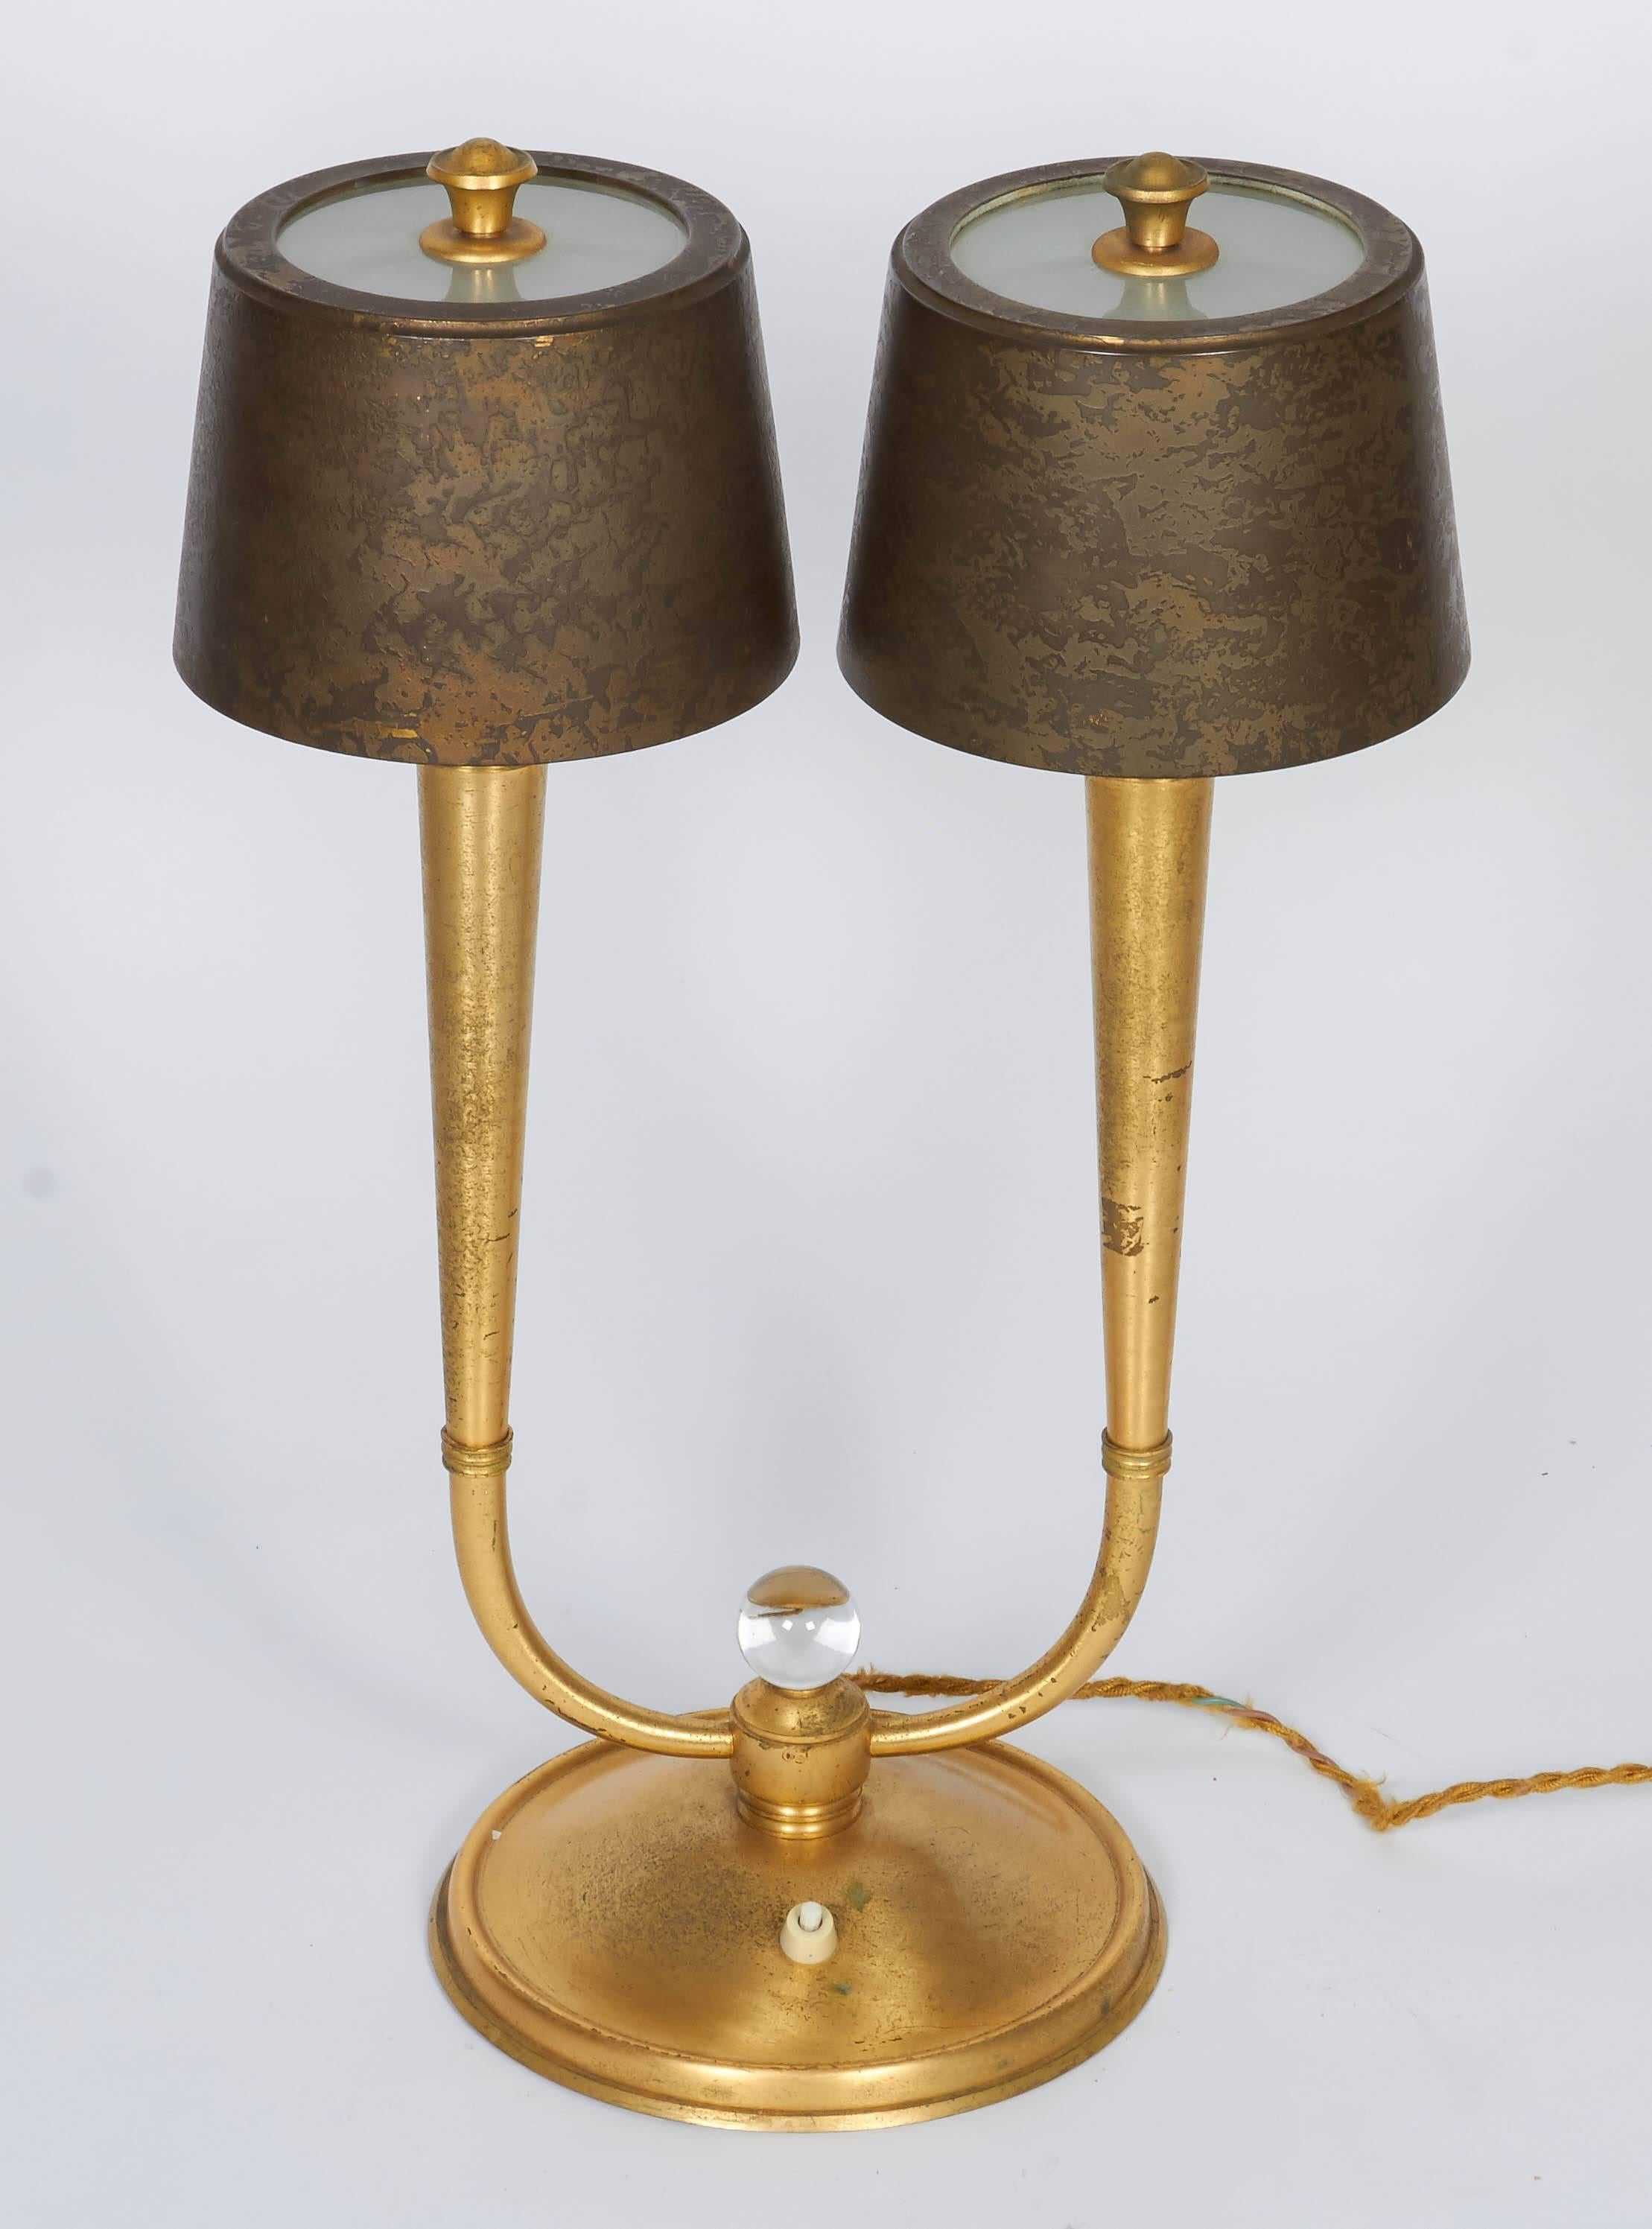 Pair of Table Lamps by Gent et Michon in cast gilded bronze.
Measures: Height: 20.5